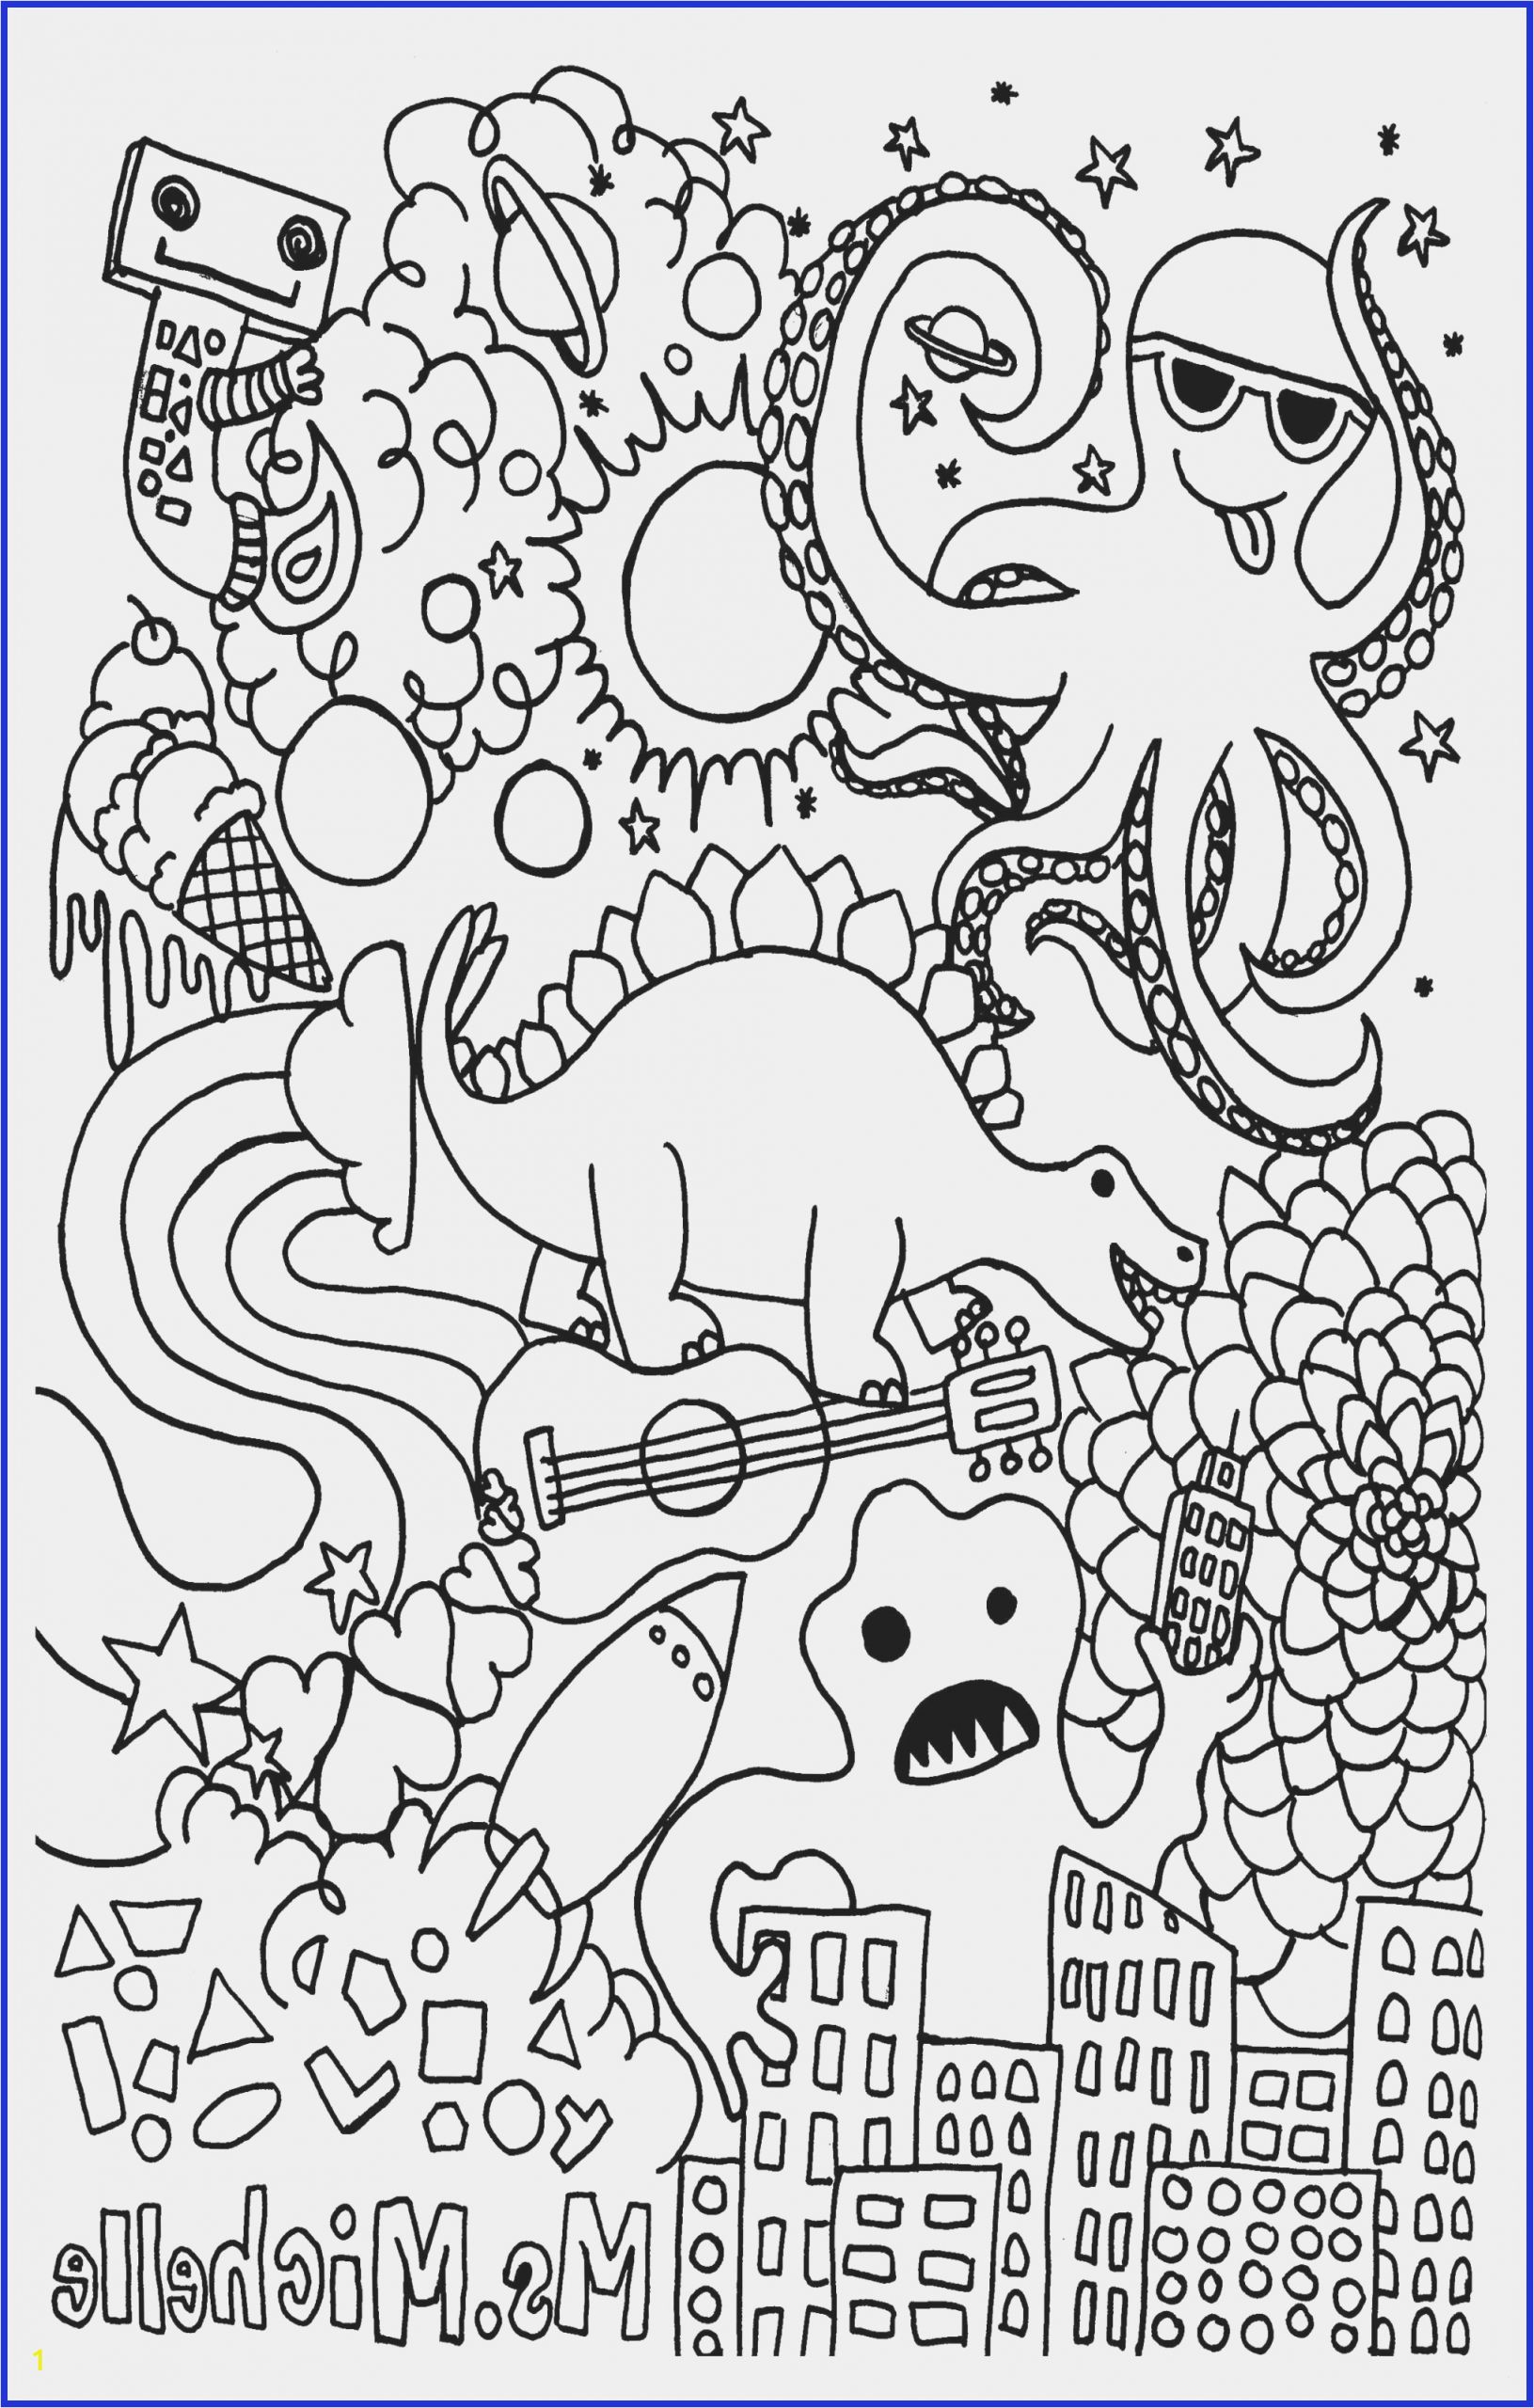 Skeleton Hand Coloring Page 28 Best Collection Justice League Coloring Page to